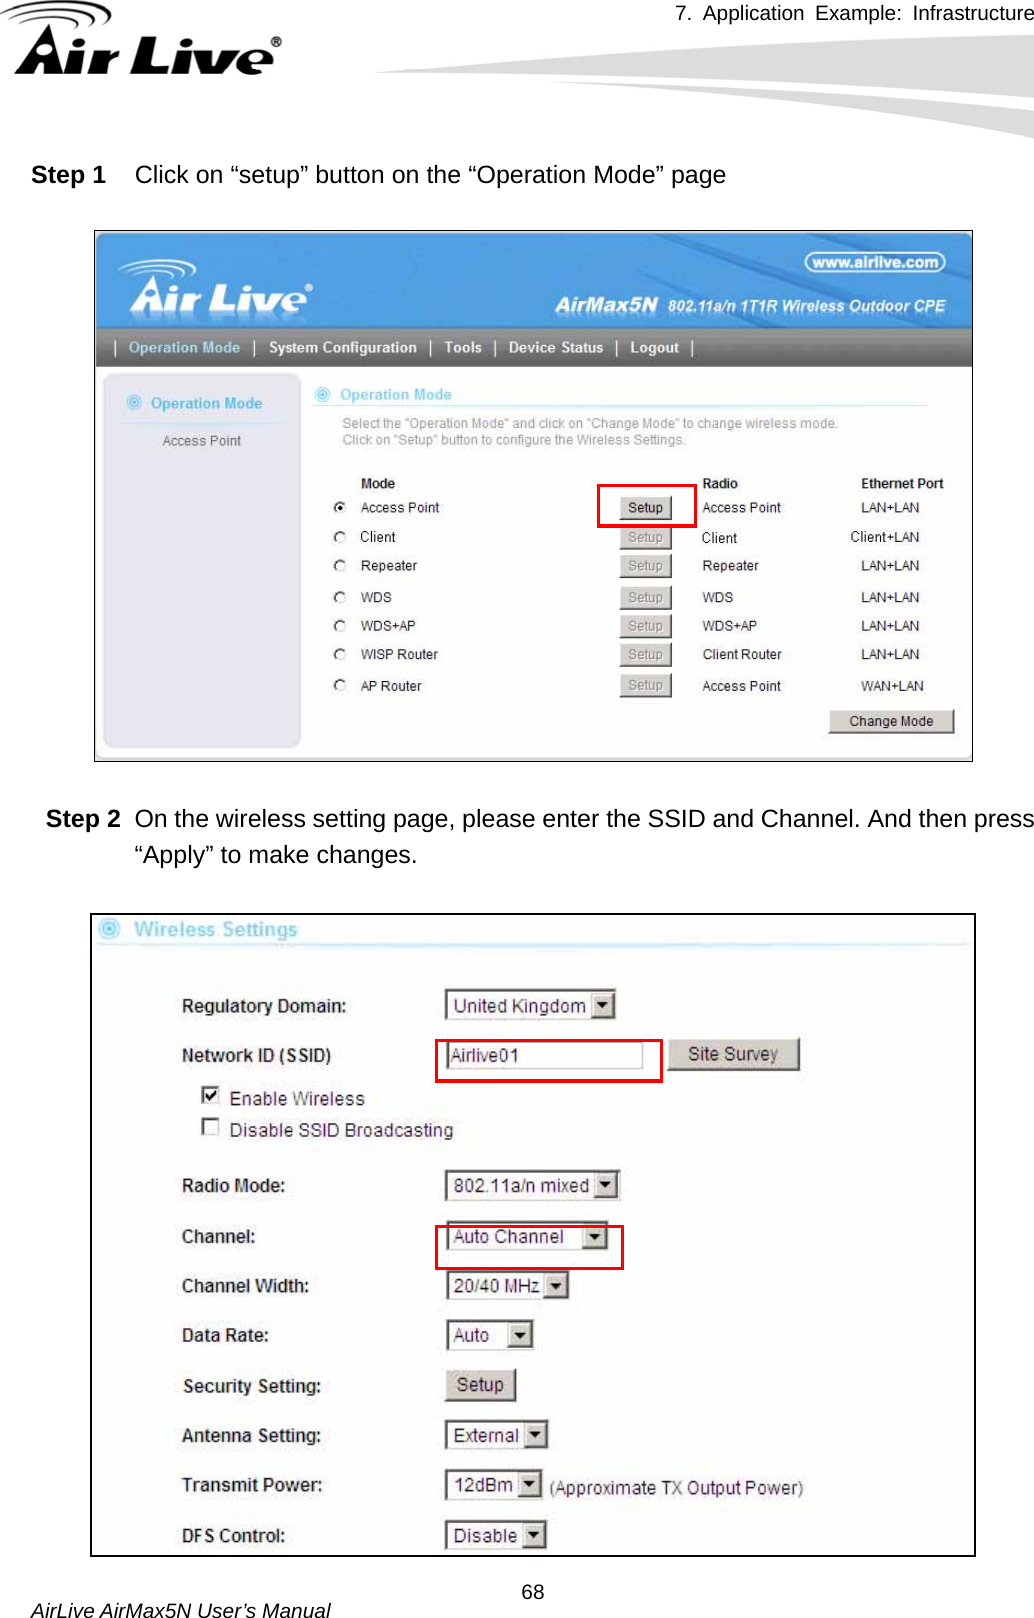 7. Application Example: Infrastructure    AirLive AirMax5N User’s Manual  68Step 1  Click on “setup” button on the “Operation Mode” page    Step 2  On the wireless setting page, please enter the SSID and Channel. And then press “Apply” to make changes.   